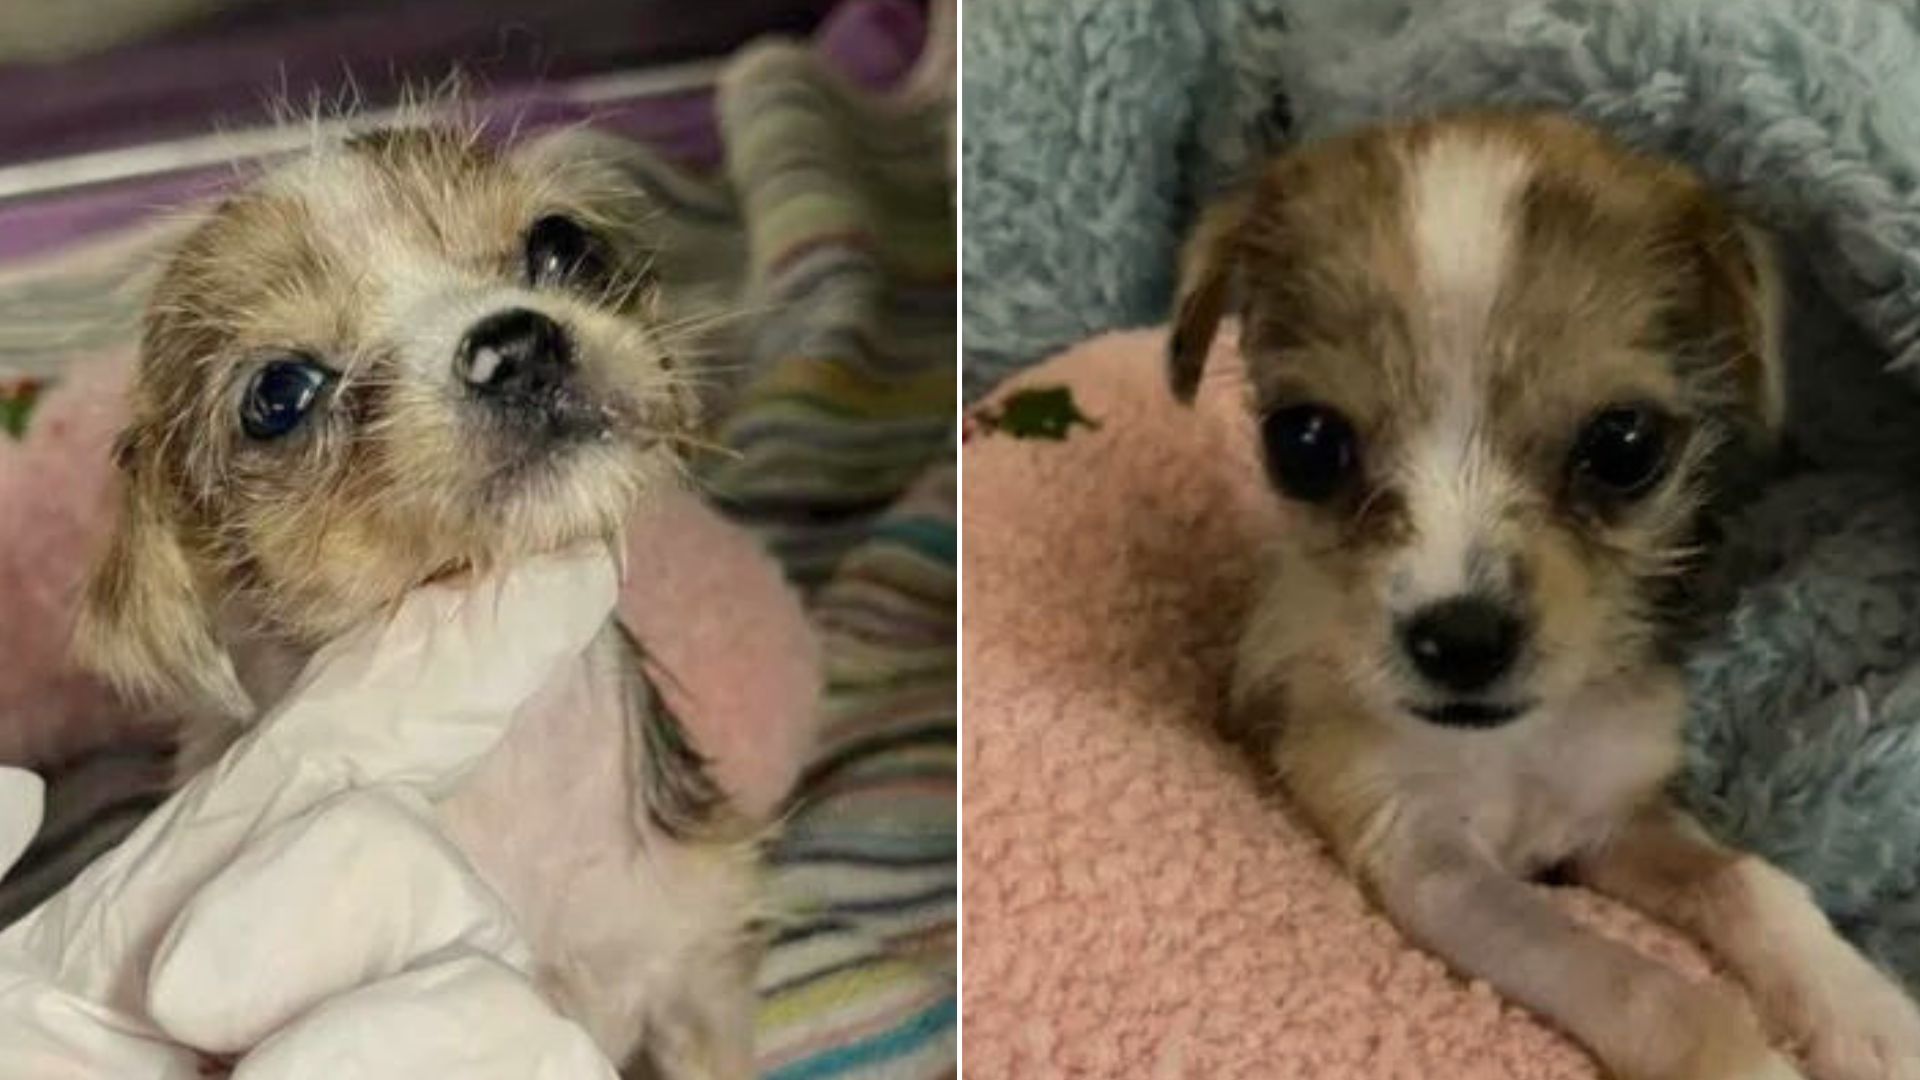 Unresponsive 1-Pound Sick Puppy Brought To Shelter Now Beats All The Odds